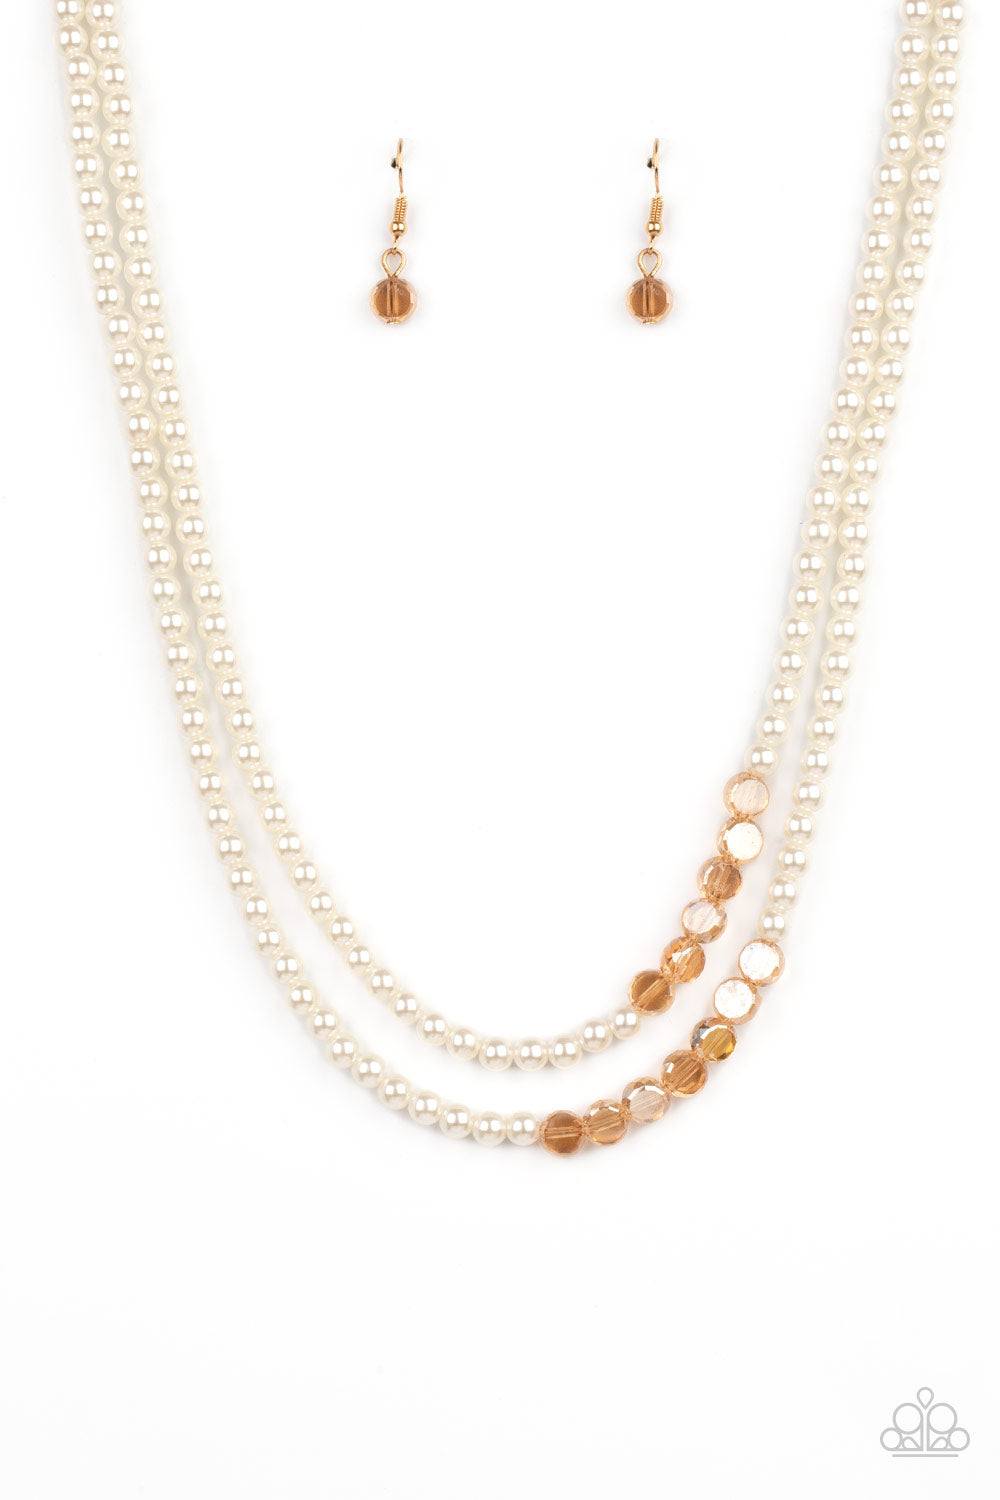 Paparazzi Accessories - Poshly Petite #N606 - Gold Necklace